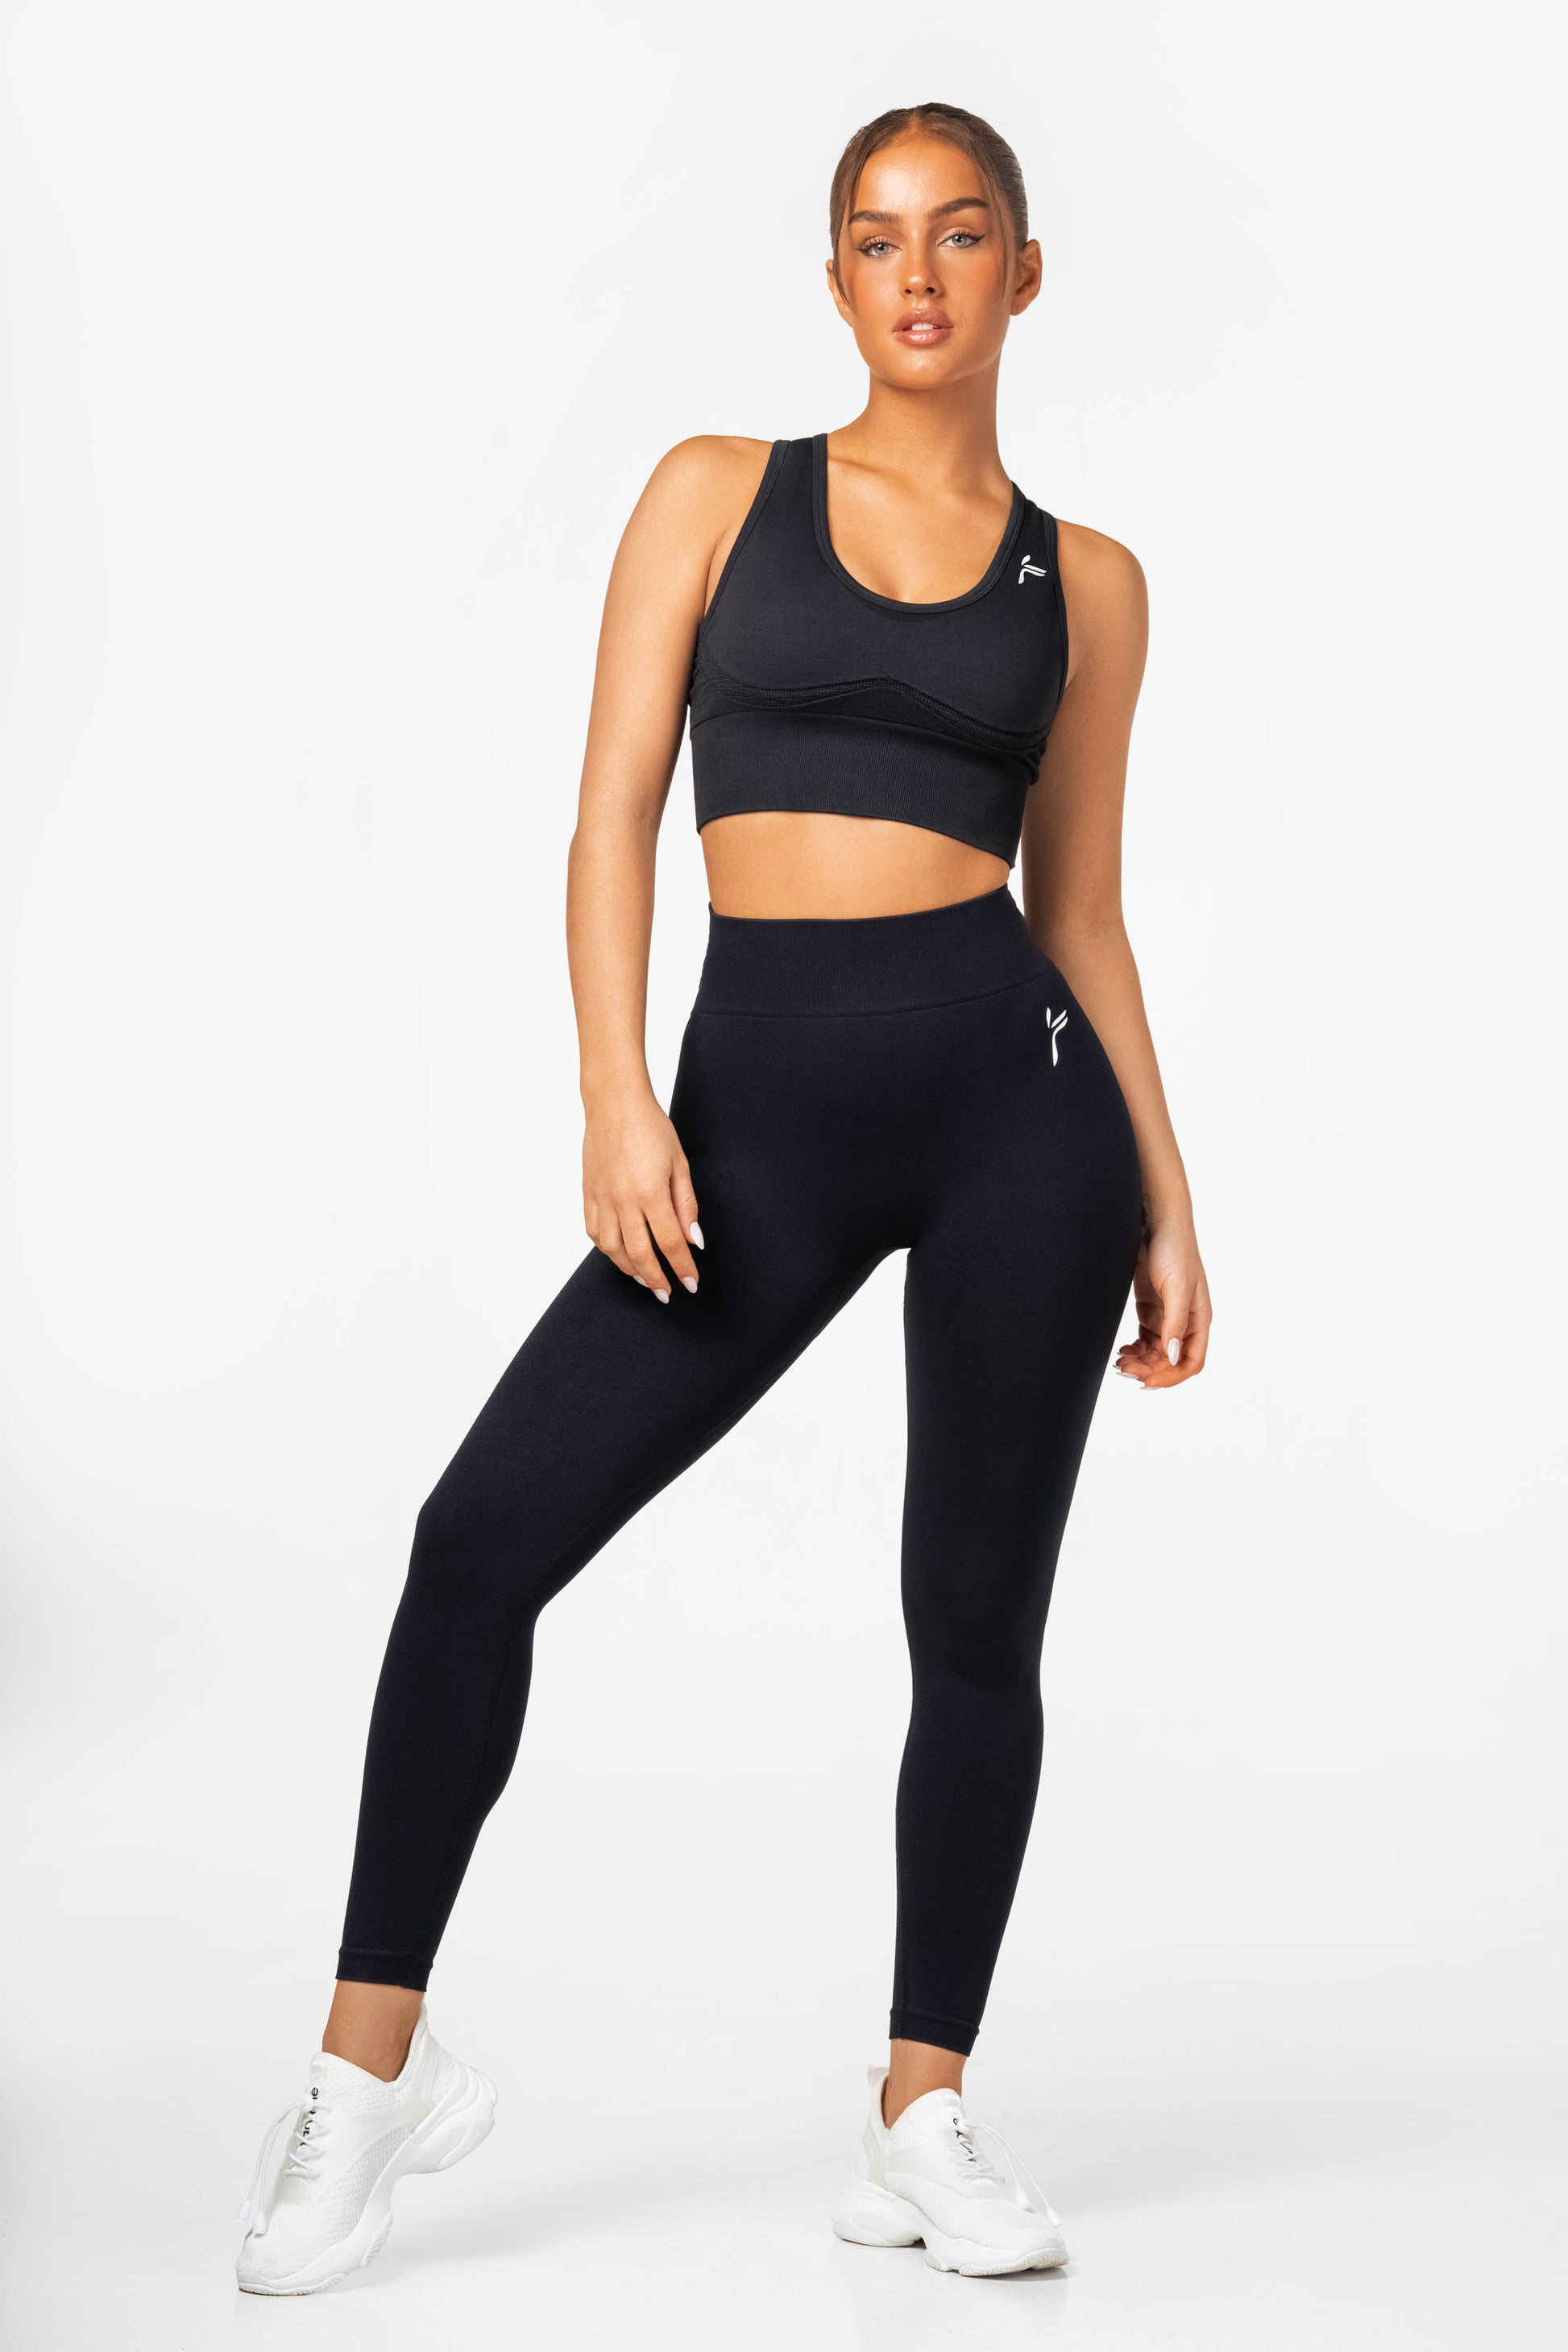 Black Elevate Crop Top - for dame - Famme - Sports Bra